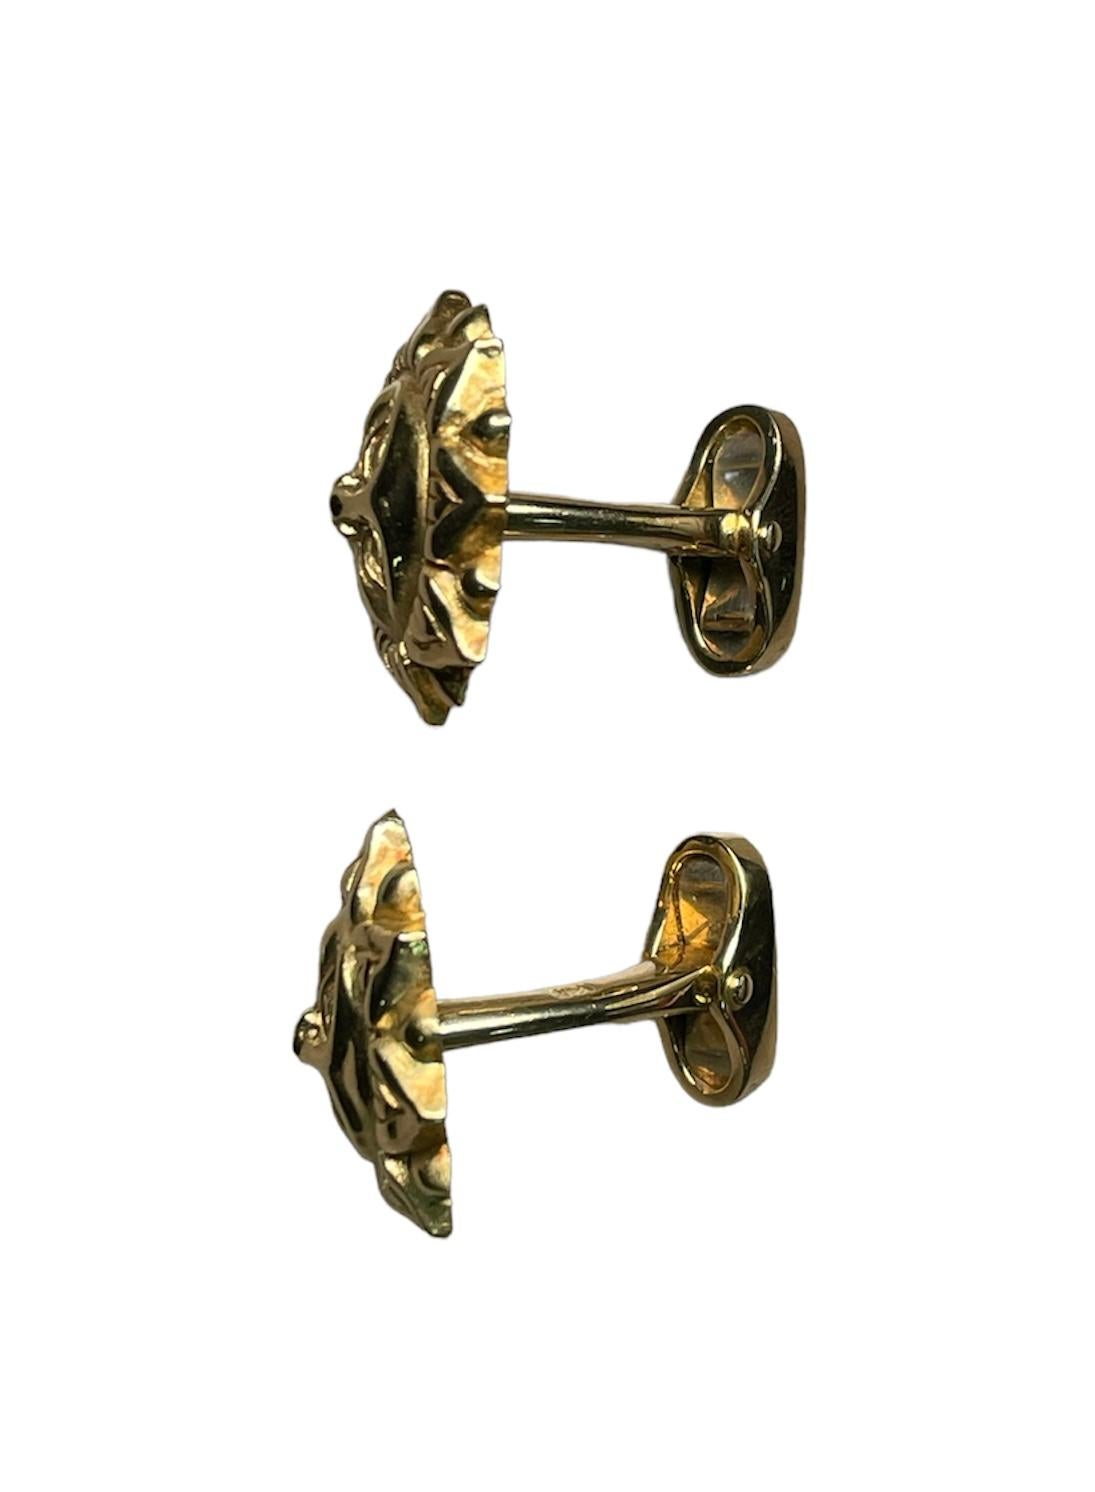 Rare 18k Yellow Gold Pair of Smiling Sun Face Cufflinks For Sale 3